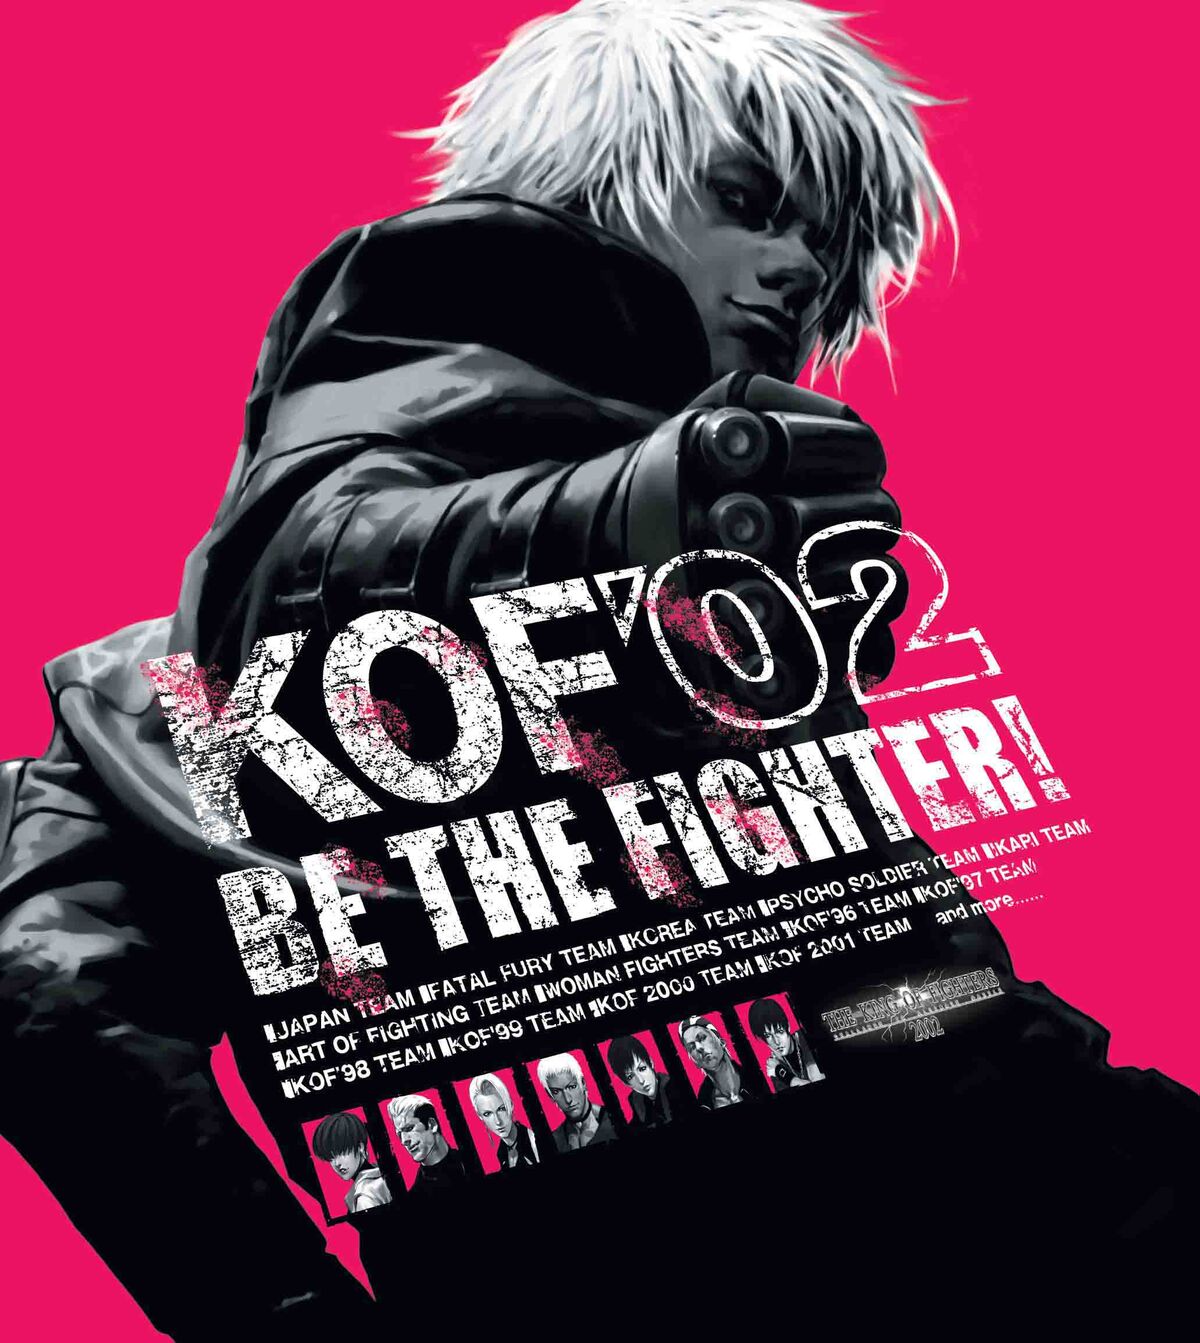 King Of Fighters 2002 APK (Full Game + OBB) For Android